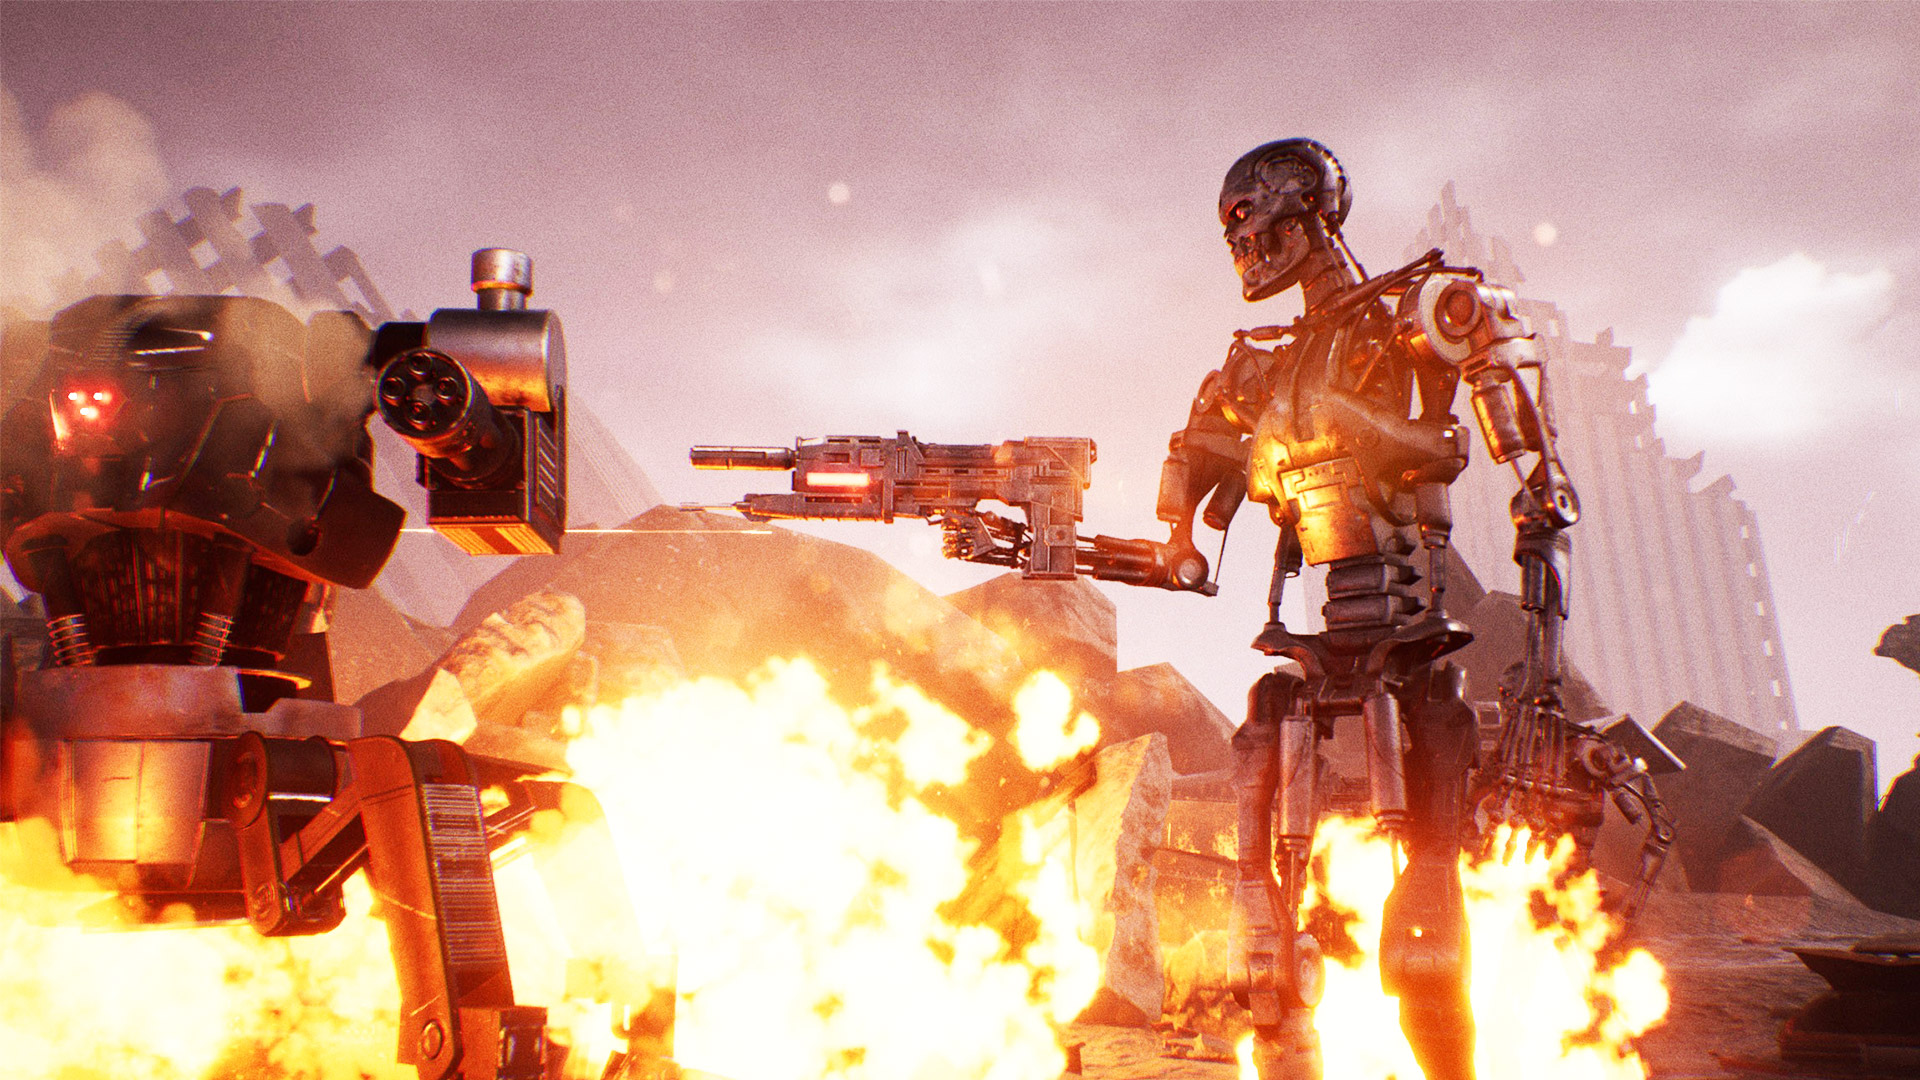 10 Things The Terminator Resistance Video Game Taught Us About